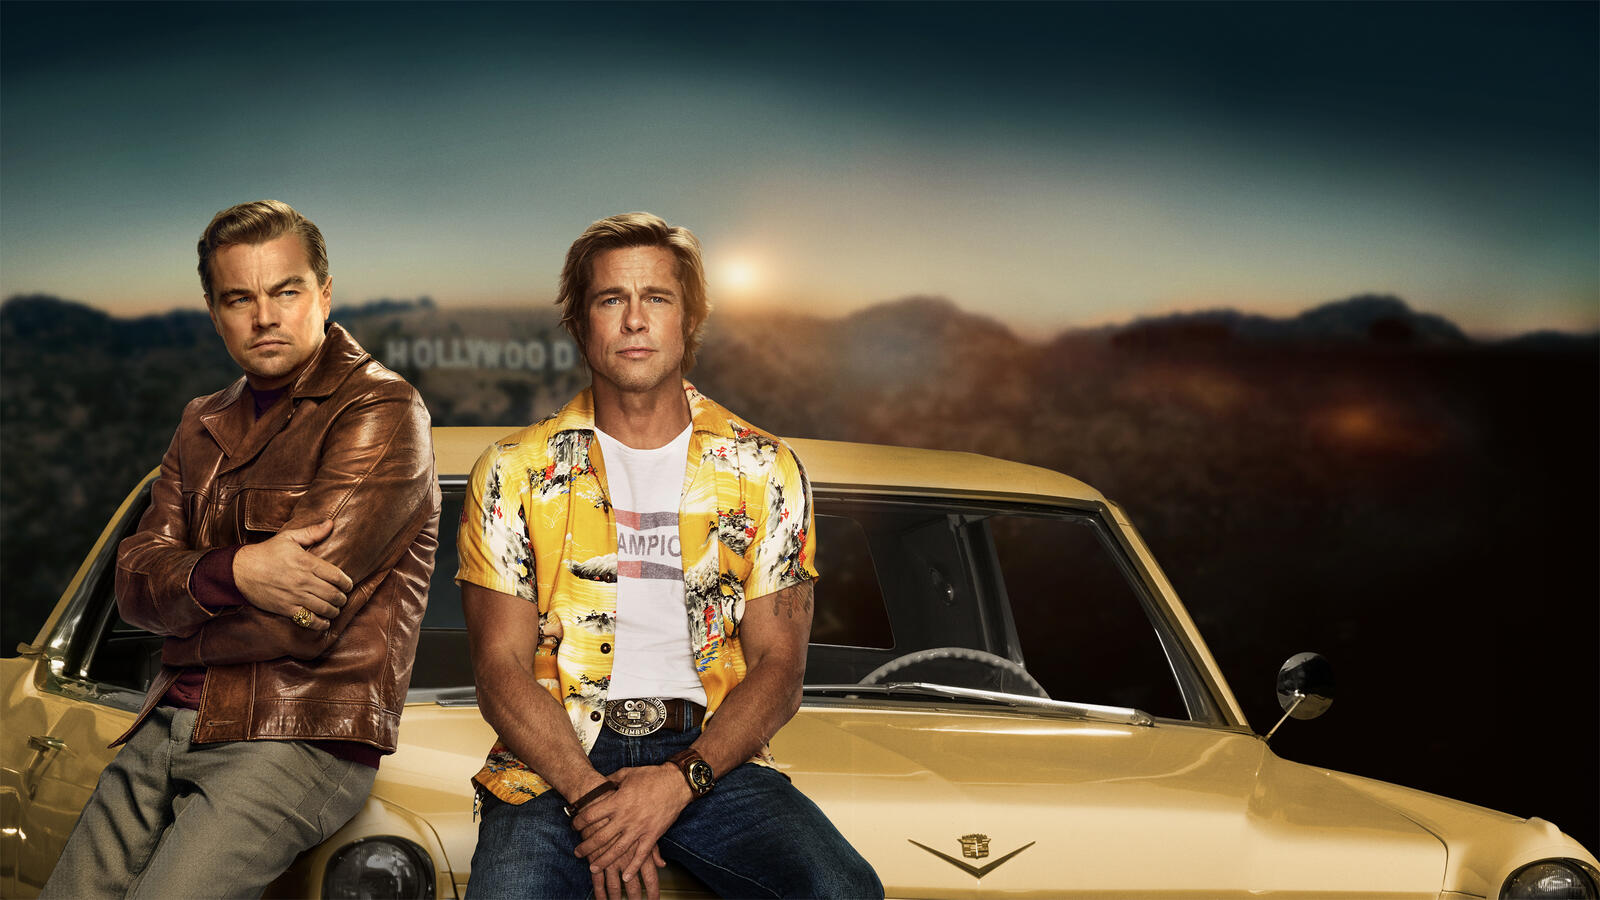 Free photo Once Upon a Time in Hollywood Movies 2019